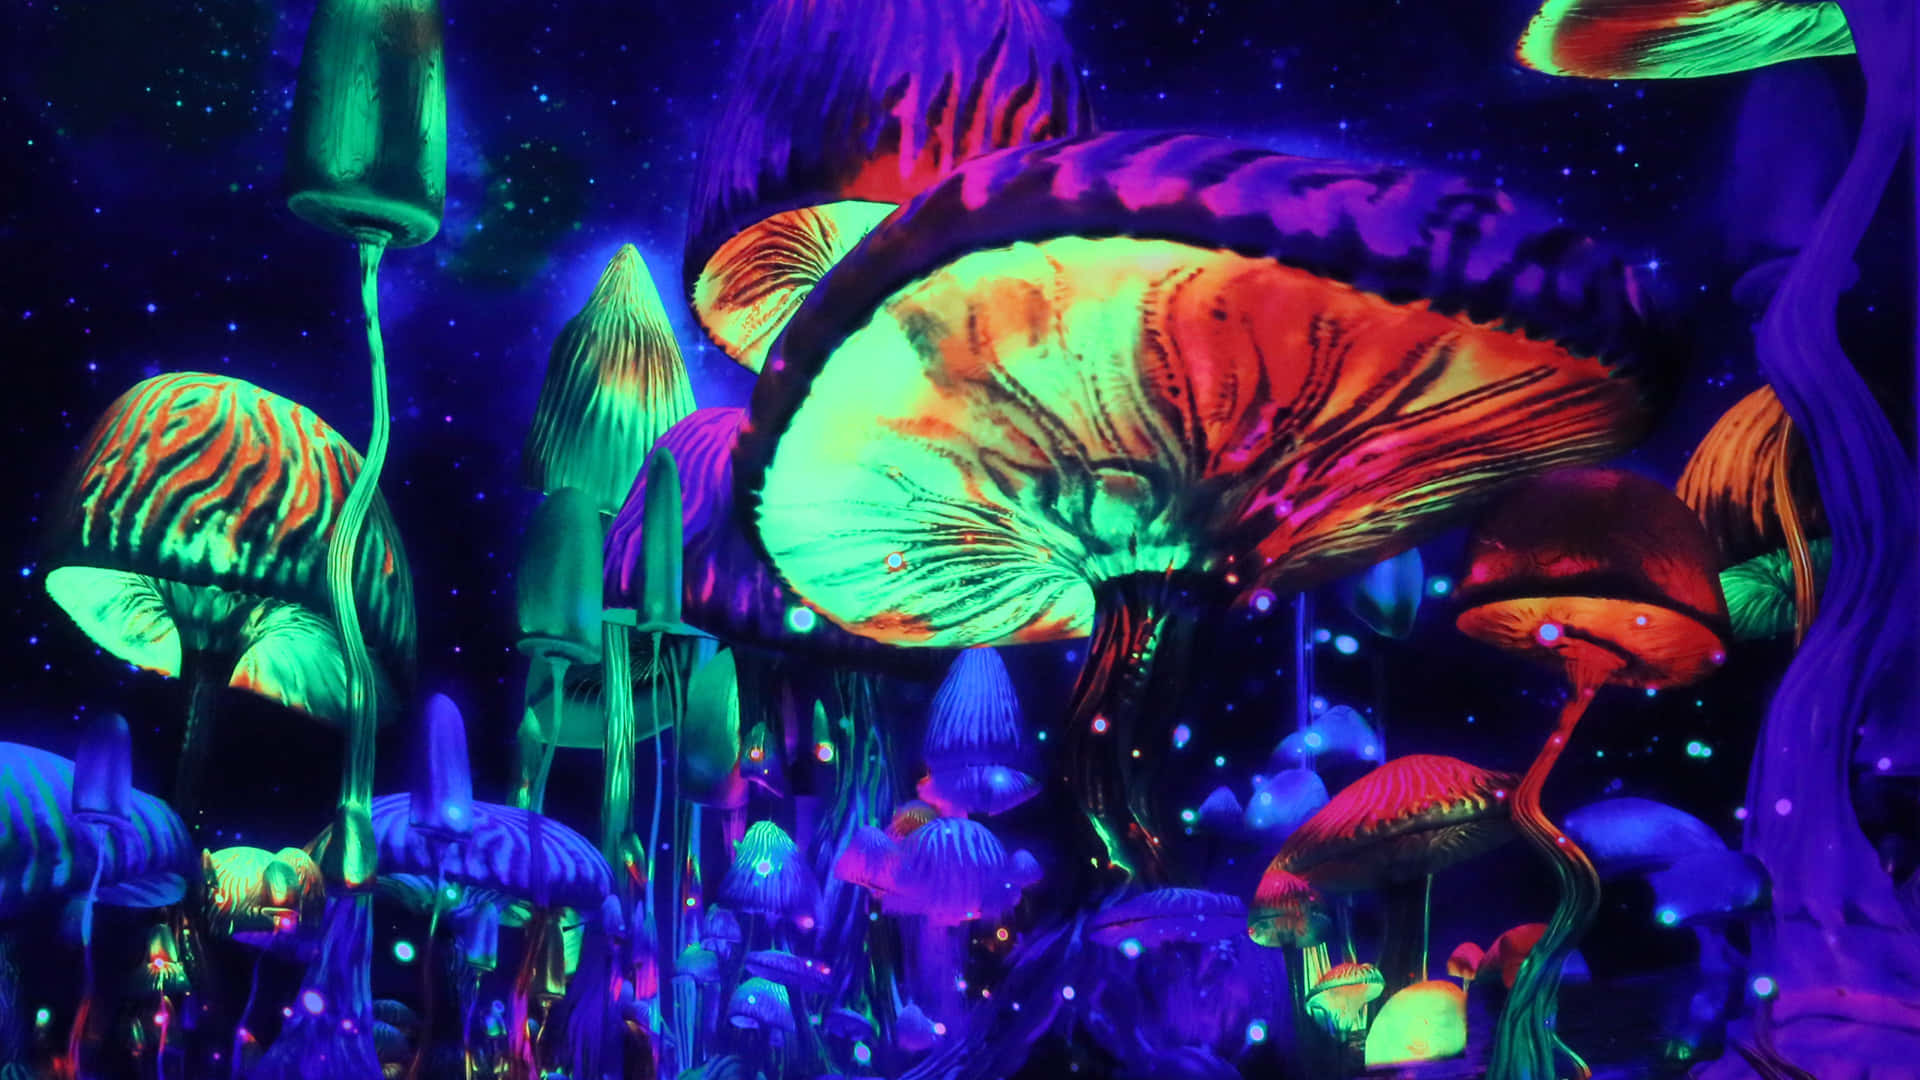 An enchanting trippy mushroom in a surreal colorful landscape Wallpaper